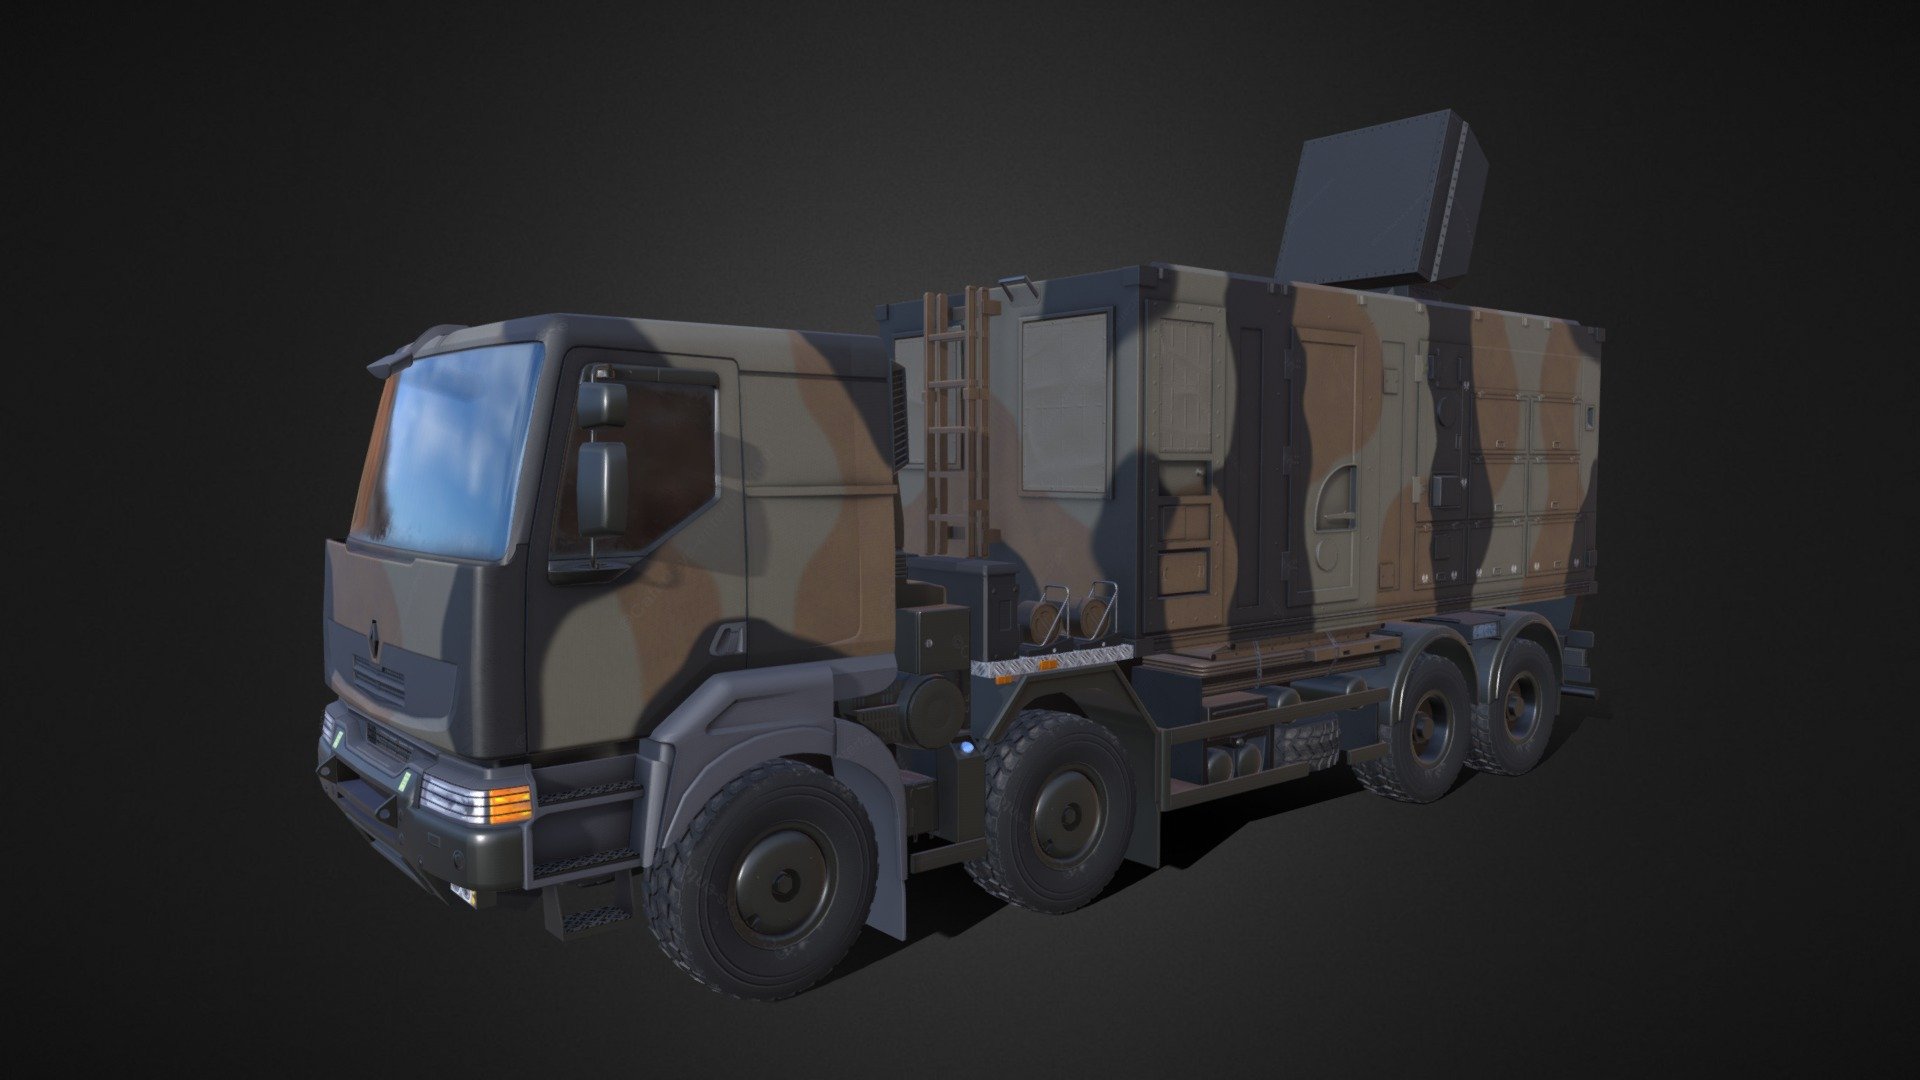 Reproduction of a Renault Kerax military truck based on photographs. Model created in Maya and textured with Substance Painter.

more information : https://www.artstation.com/cedricb - Renault Kerax Samp/T Mamba MRI - 3D model by cedb 3d model